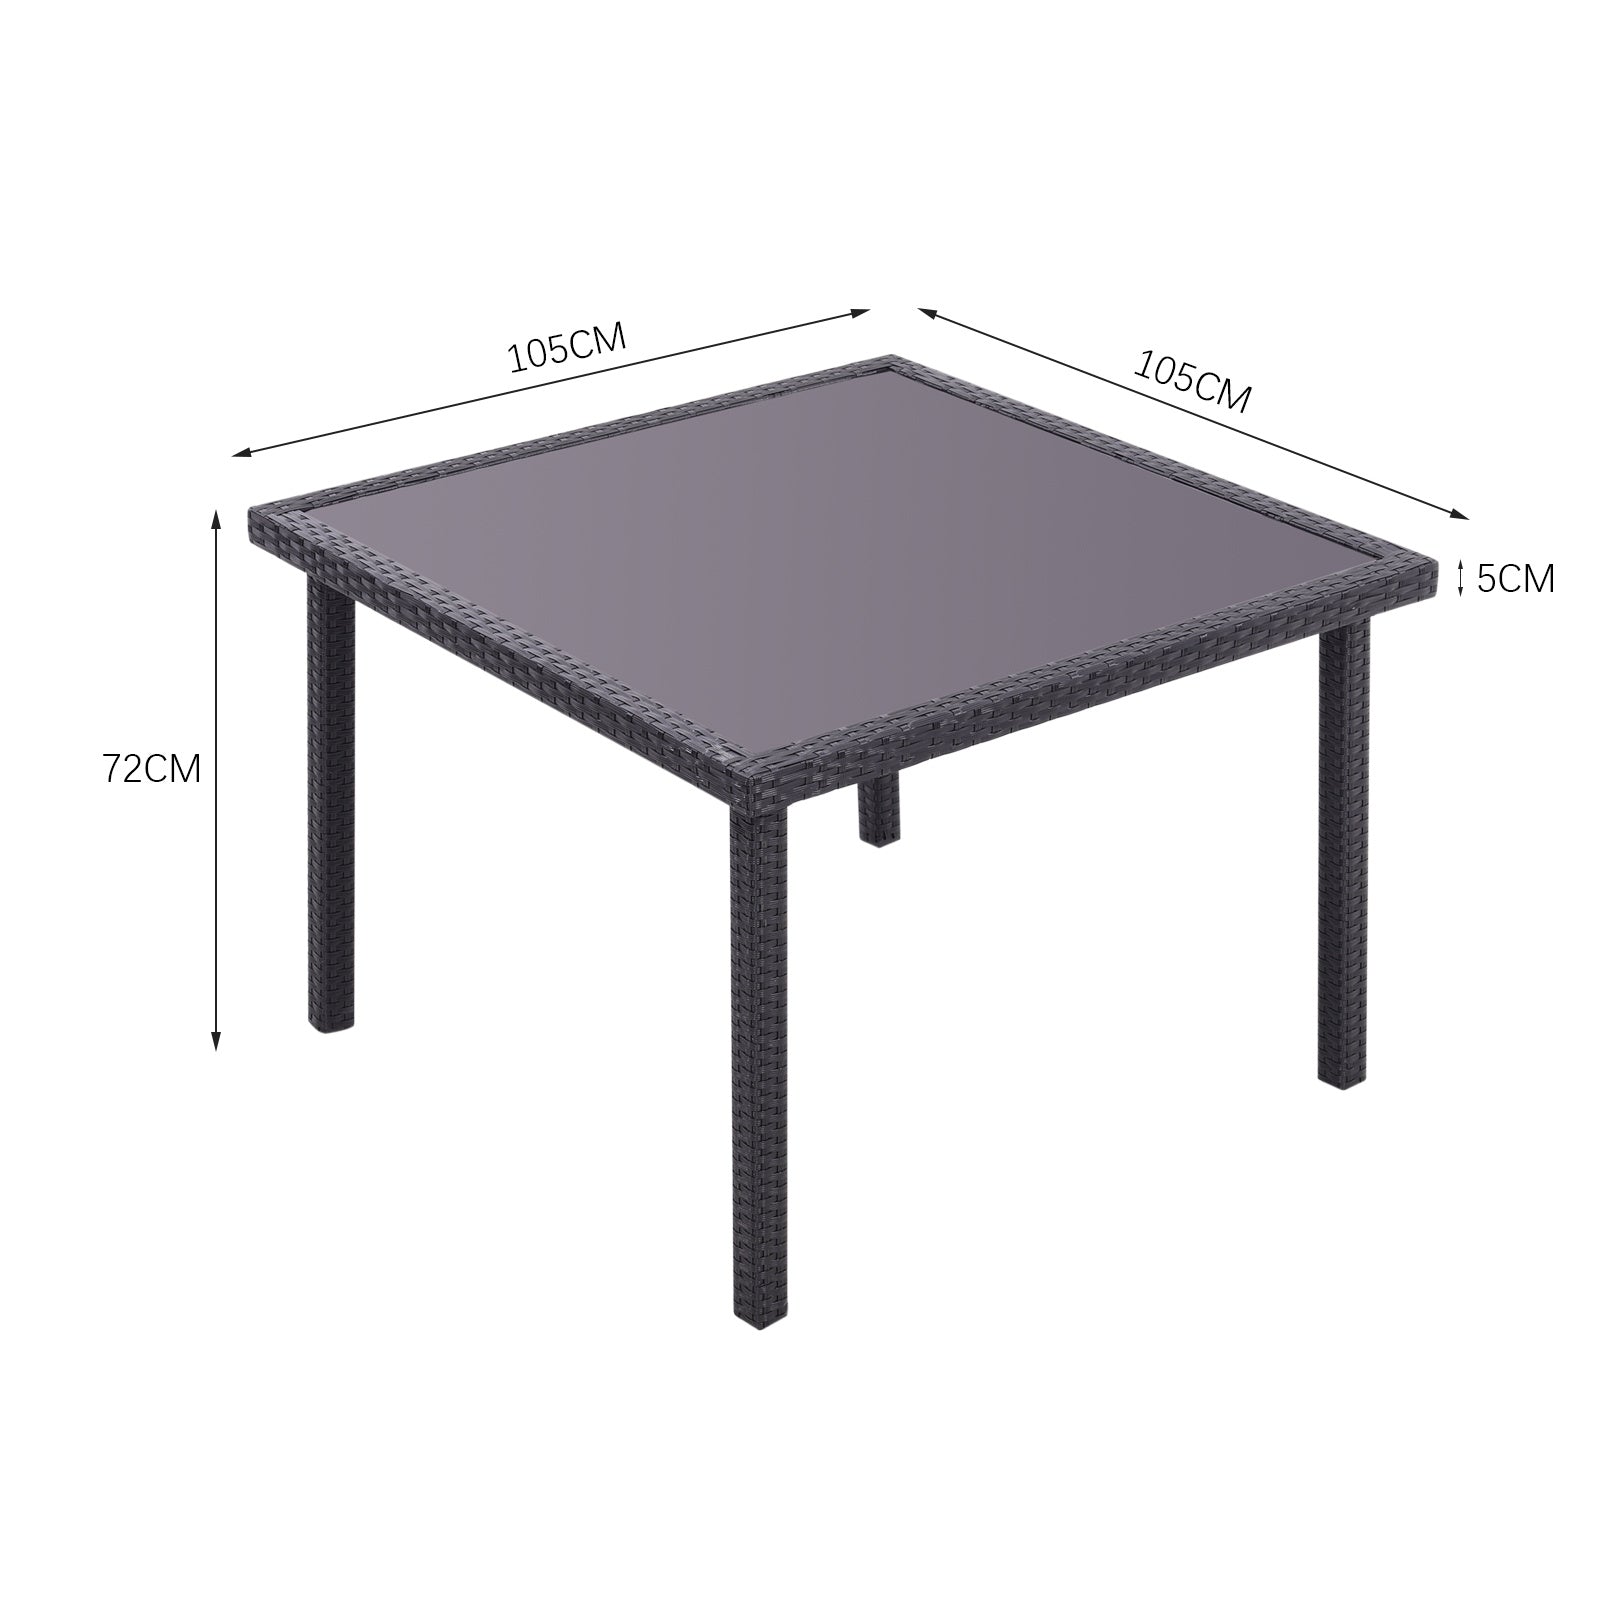 Garden Table Dining Patio Outdoor Table Black/Brown Garden Dining Table Living and Home H72 * W105 * D105 cm Black 